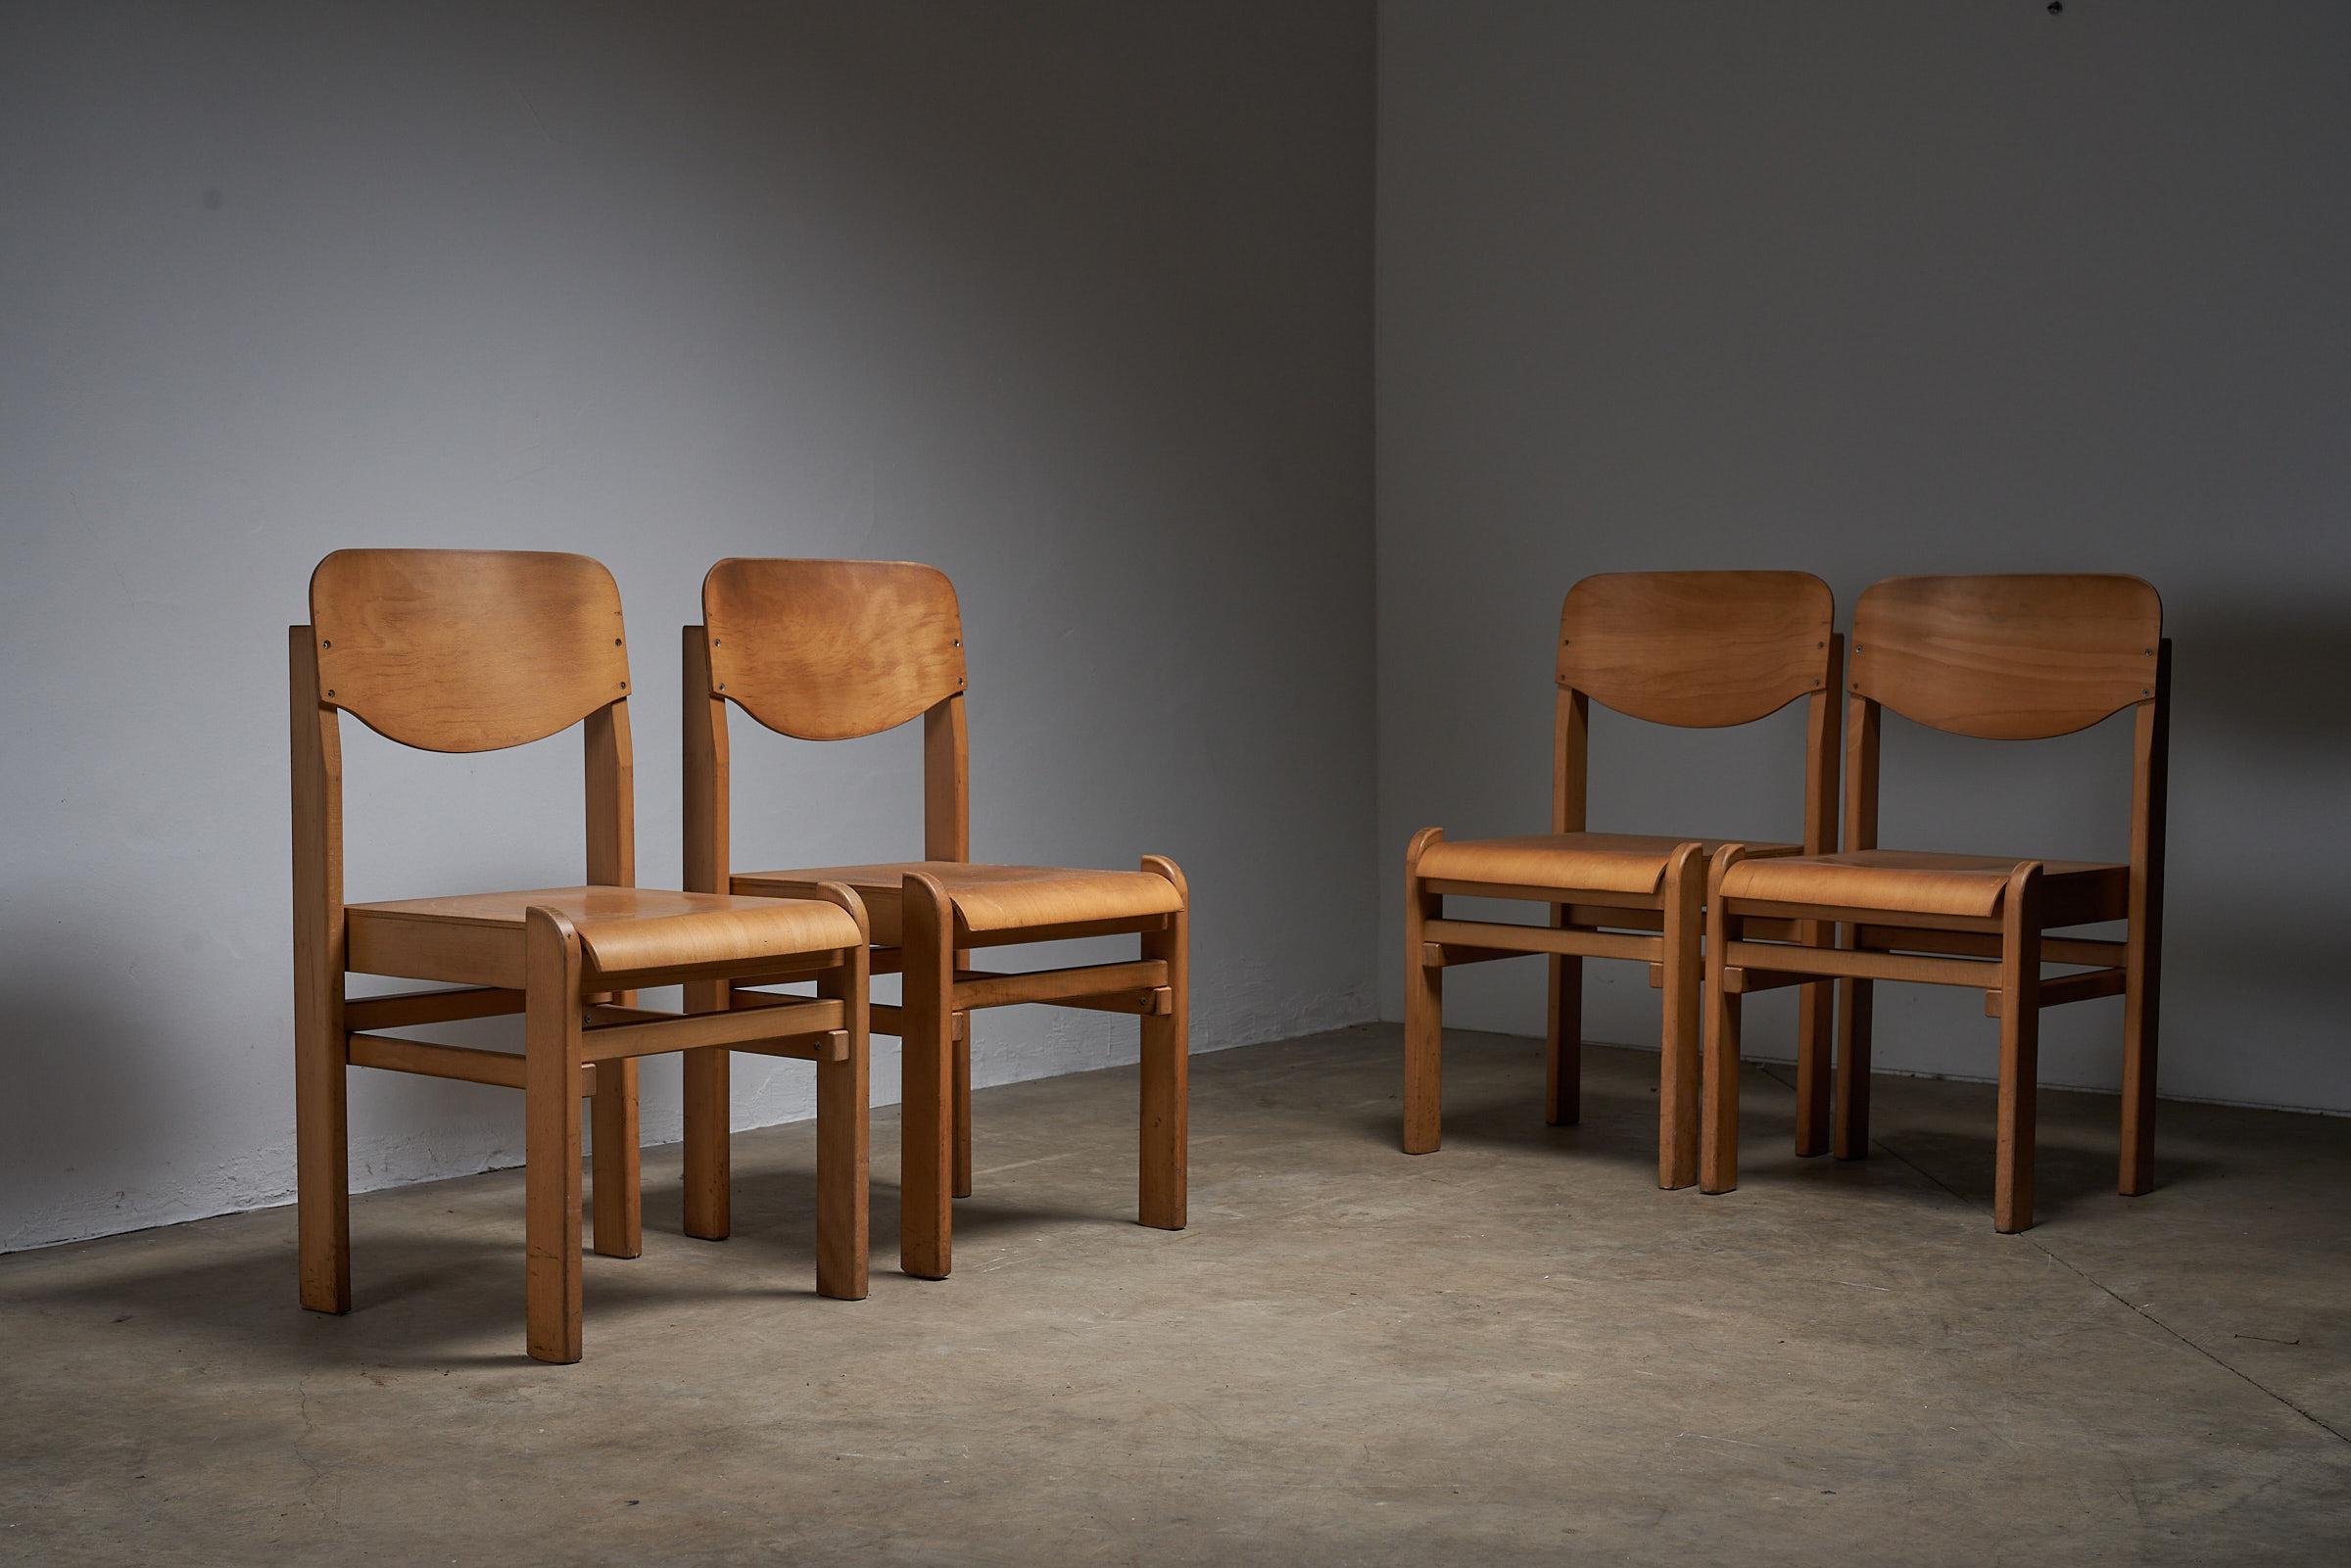 Hand-Crafted Vintage Wooden Brutalist Chairs 1970 For Sale